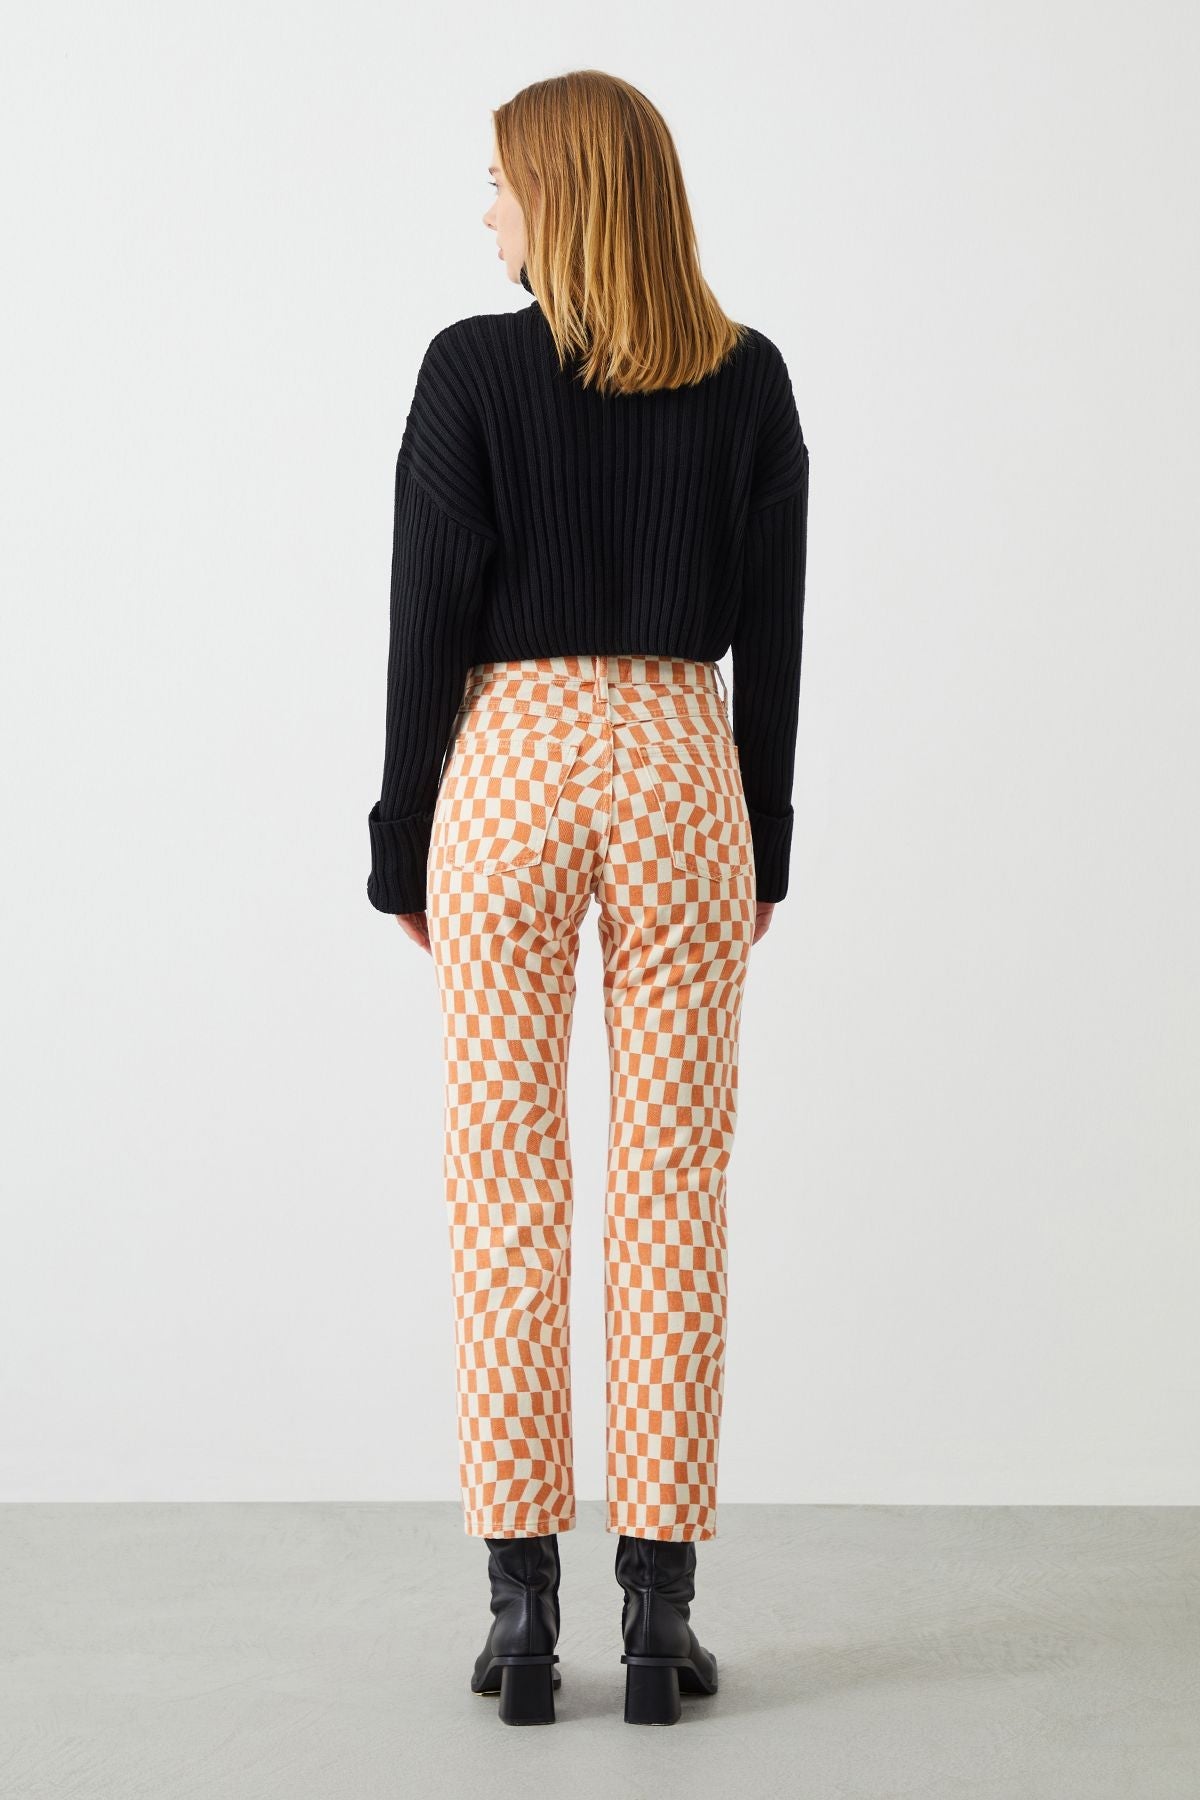 Orange Checkered Pants by Sustainable Jeans Brand Ra Denim